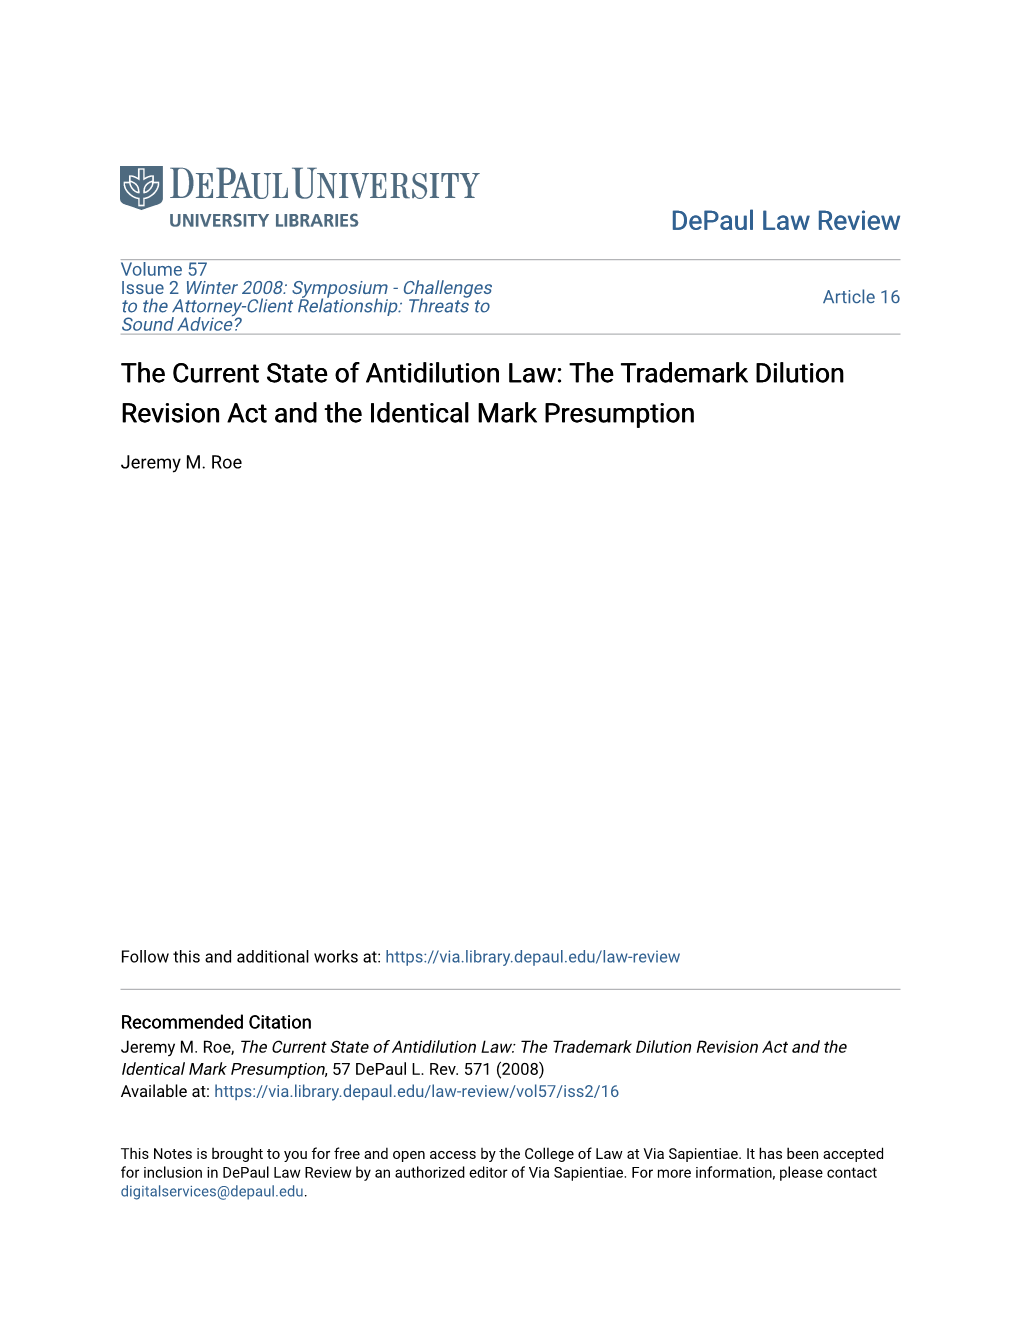 The Current State of Antidilution Law: the Trademark Dilution Revision Act and the Identical Mark Presumption